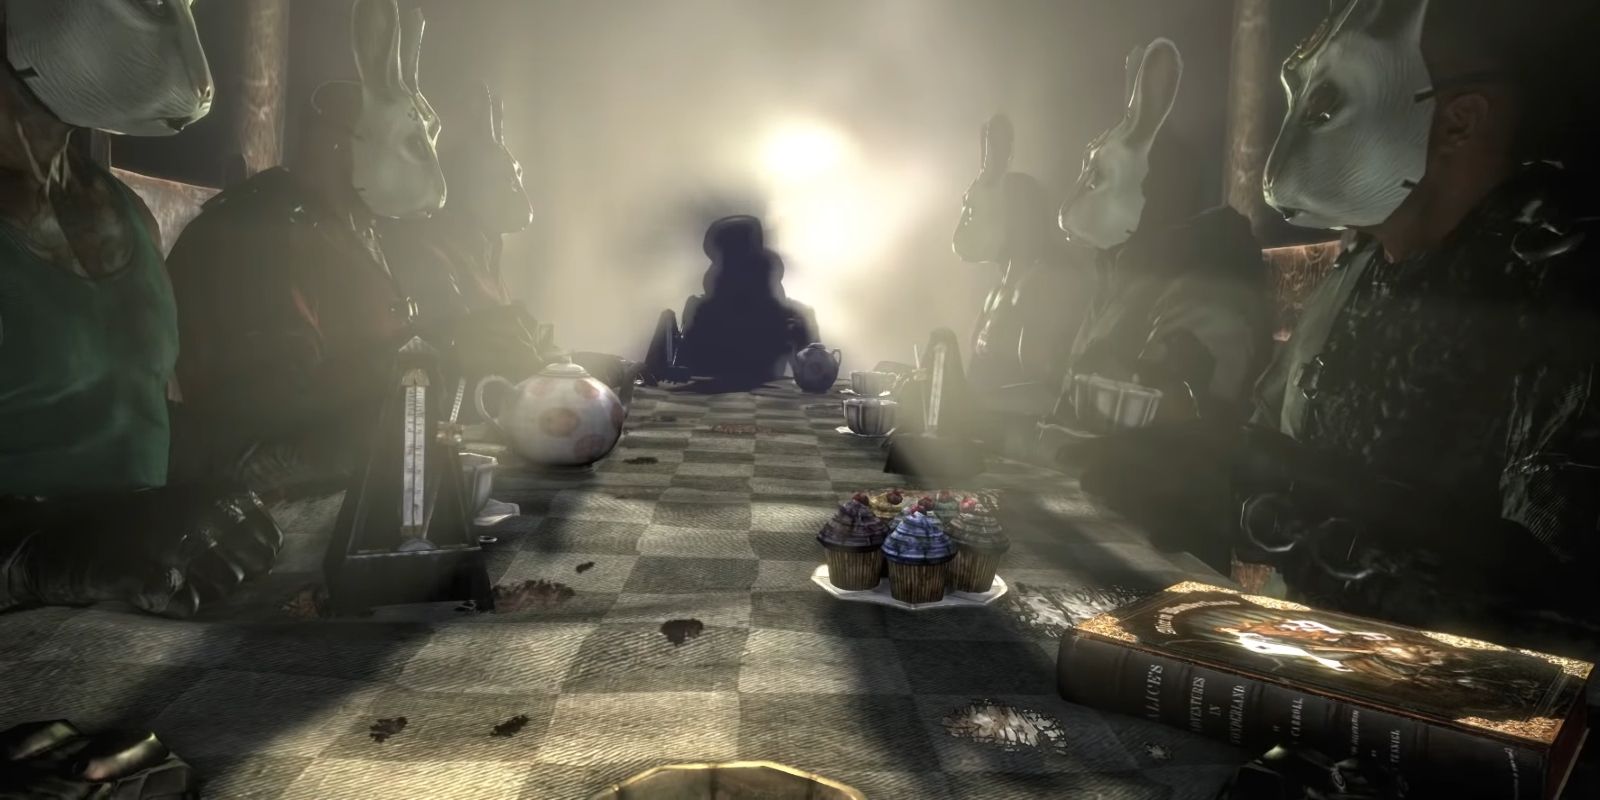 The Mad Hatter at a tea party with mind controlled thugs in Batman: Arkham City